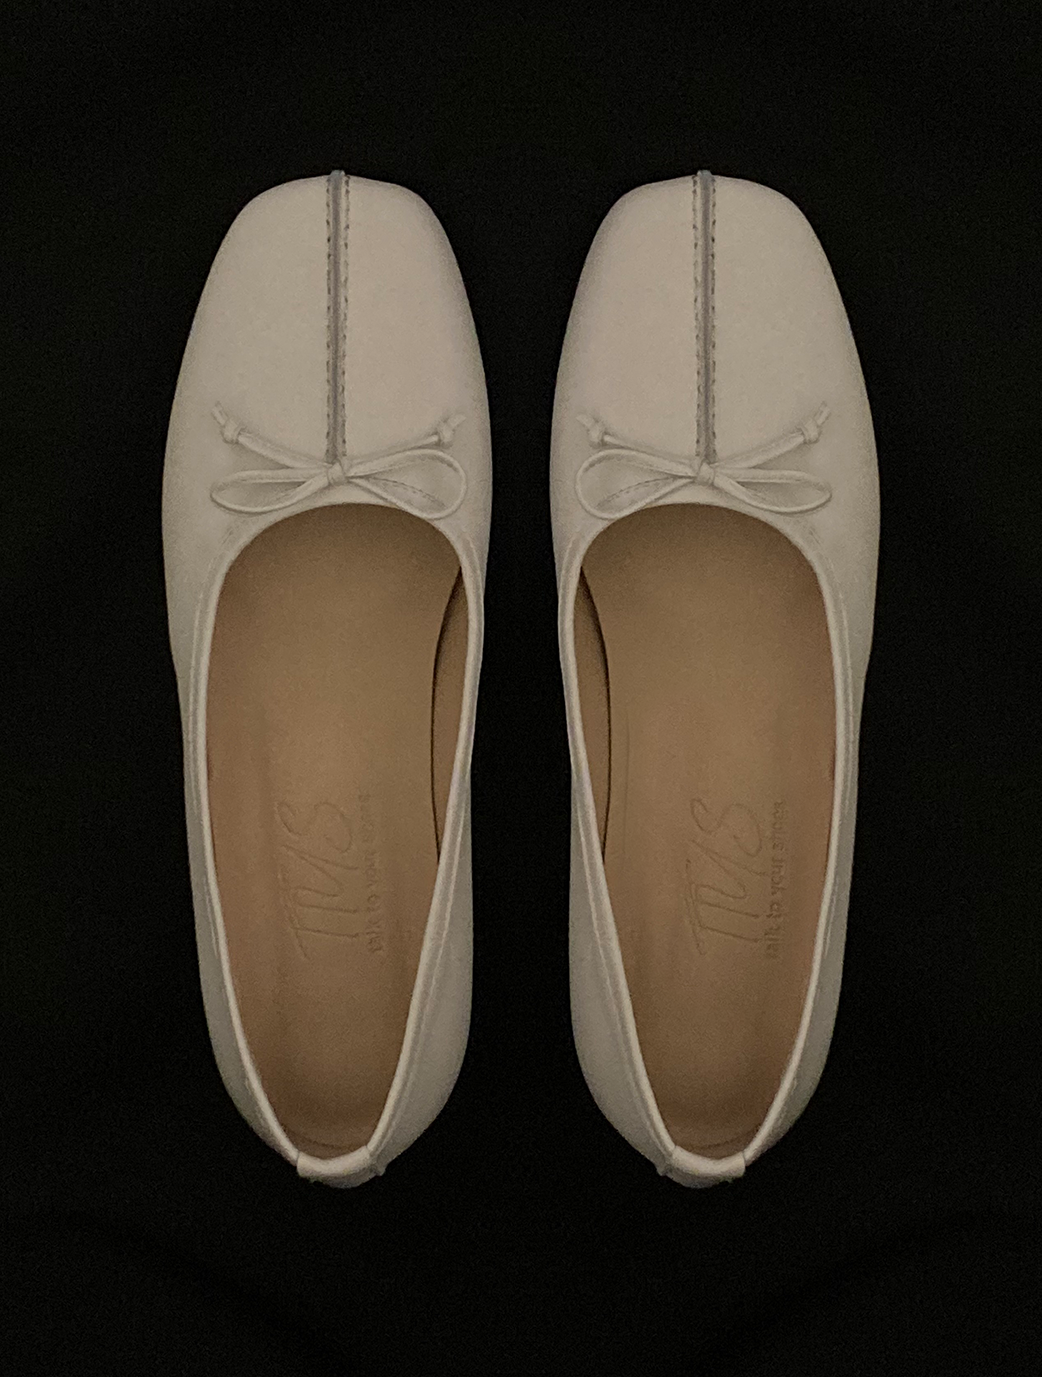 [Exclusive color] Suede stitch flat - Ivory